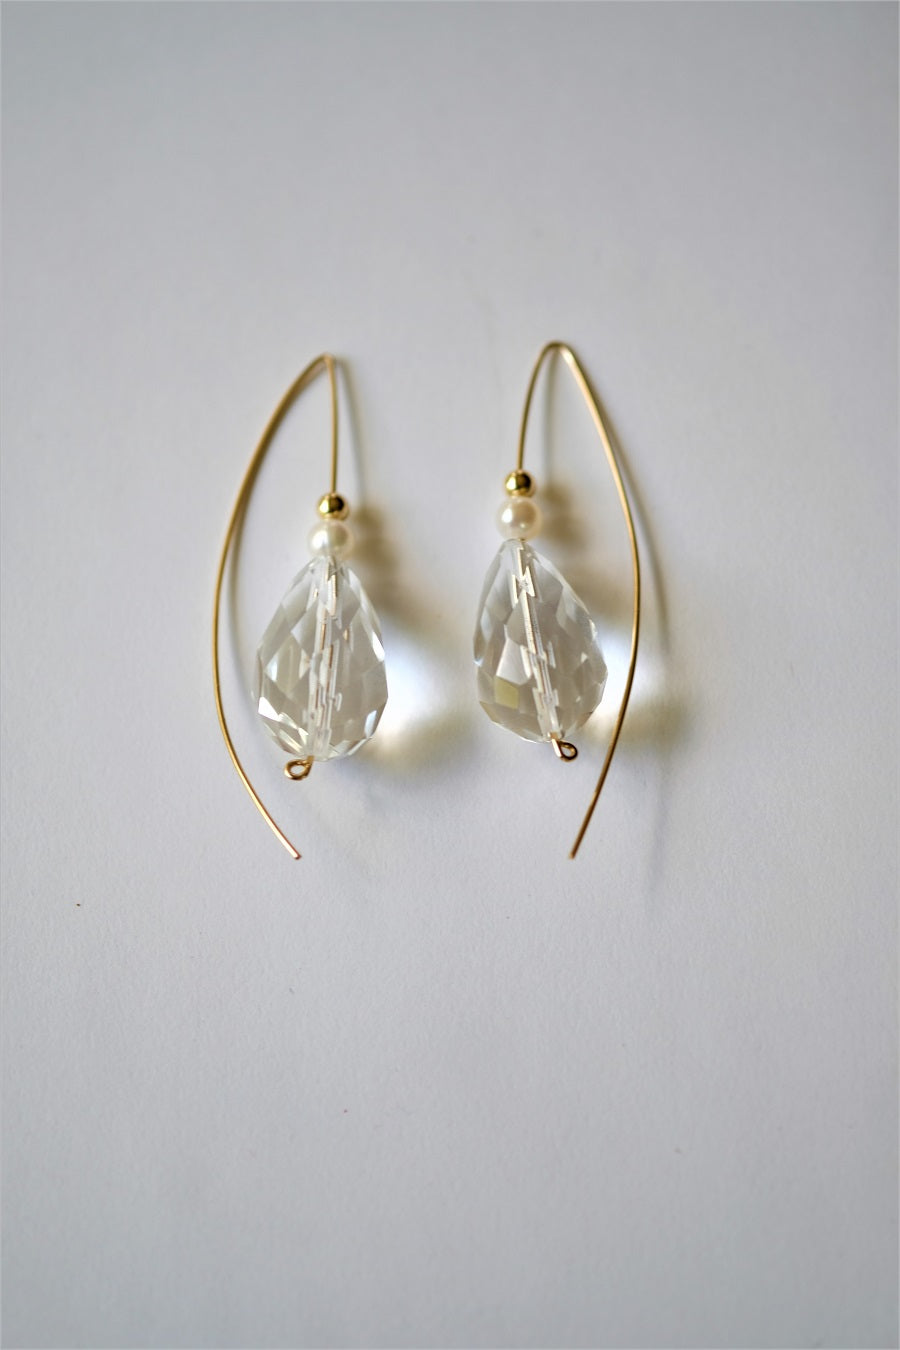 Faceted Rock Crystal Drop, Cultured Pearls on 14k gold filled Wire Earrings